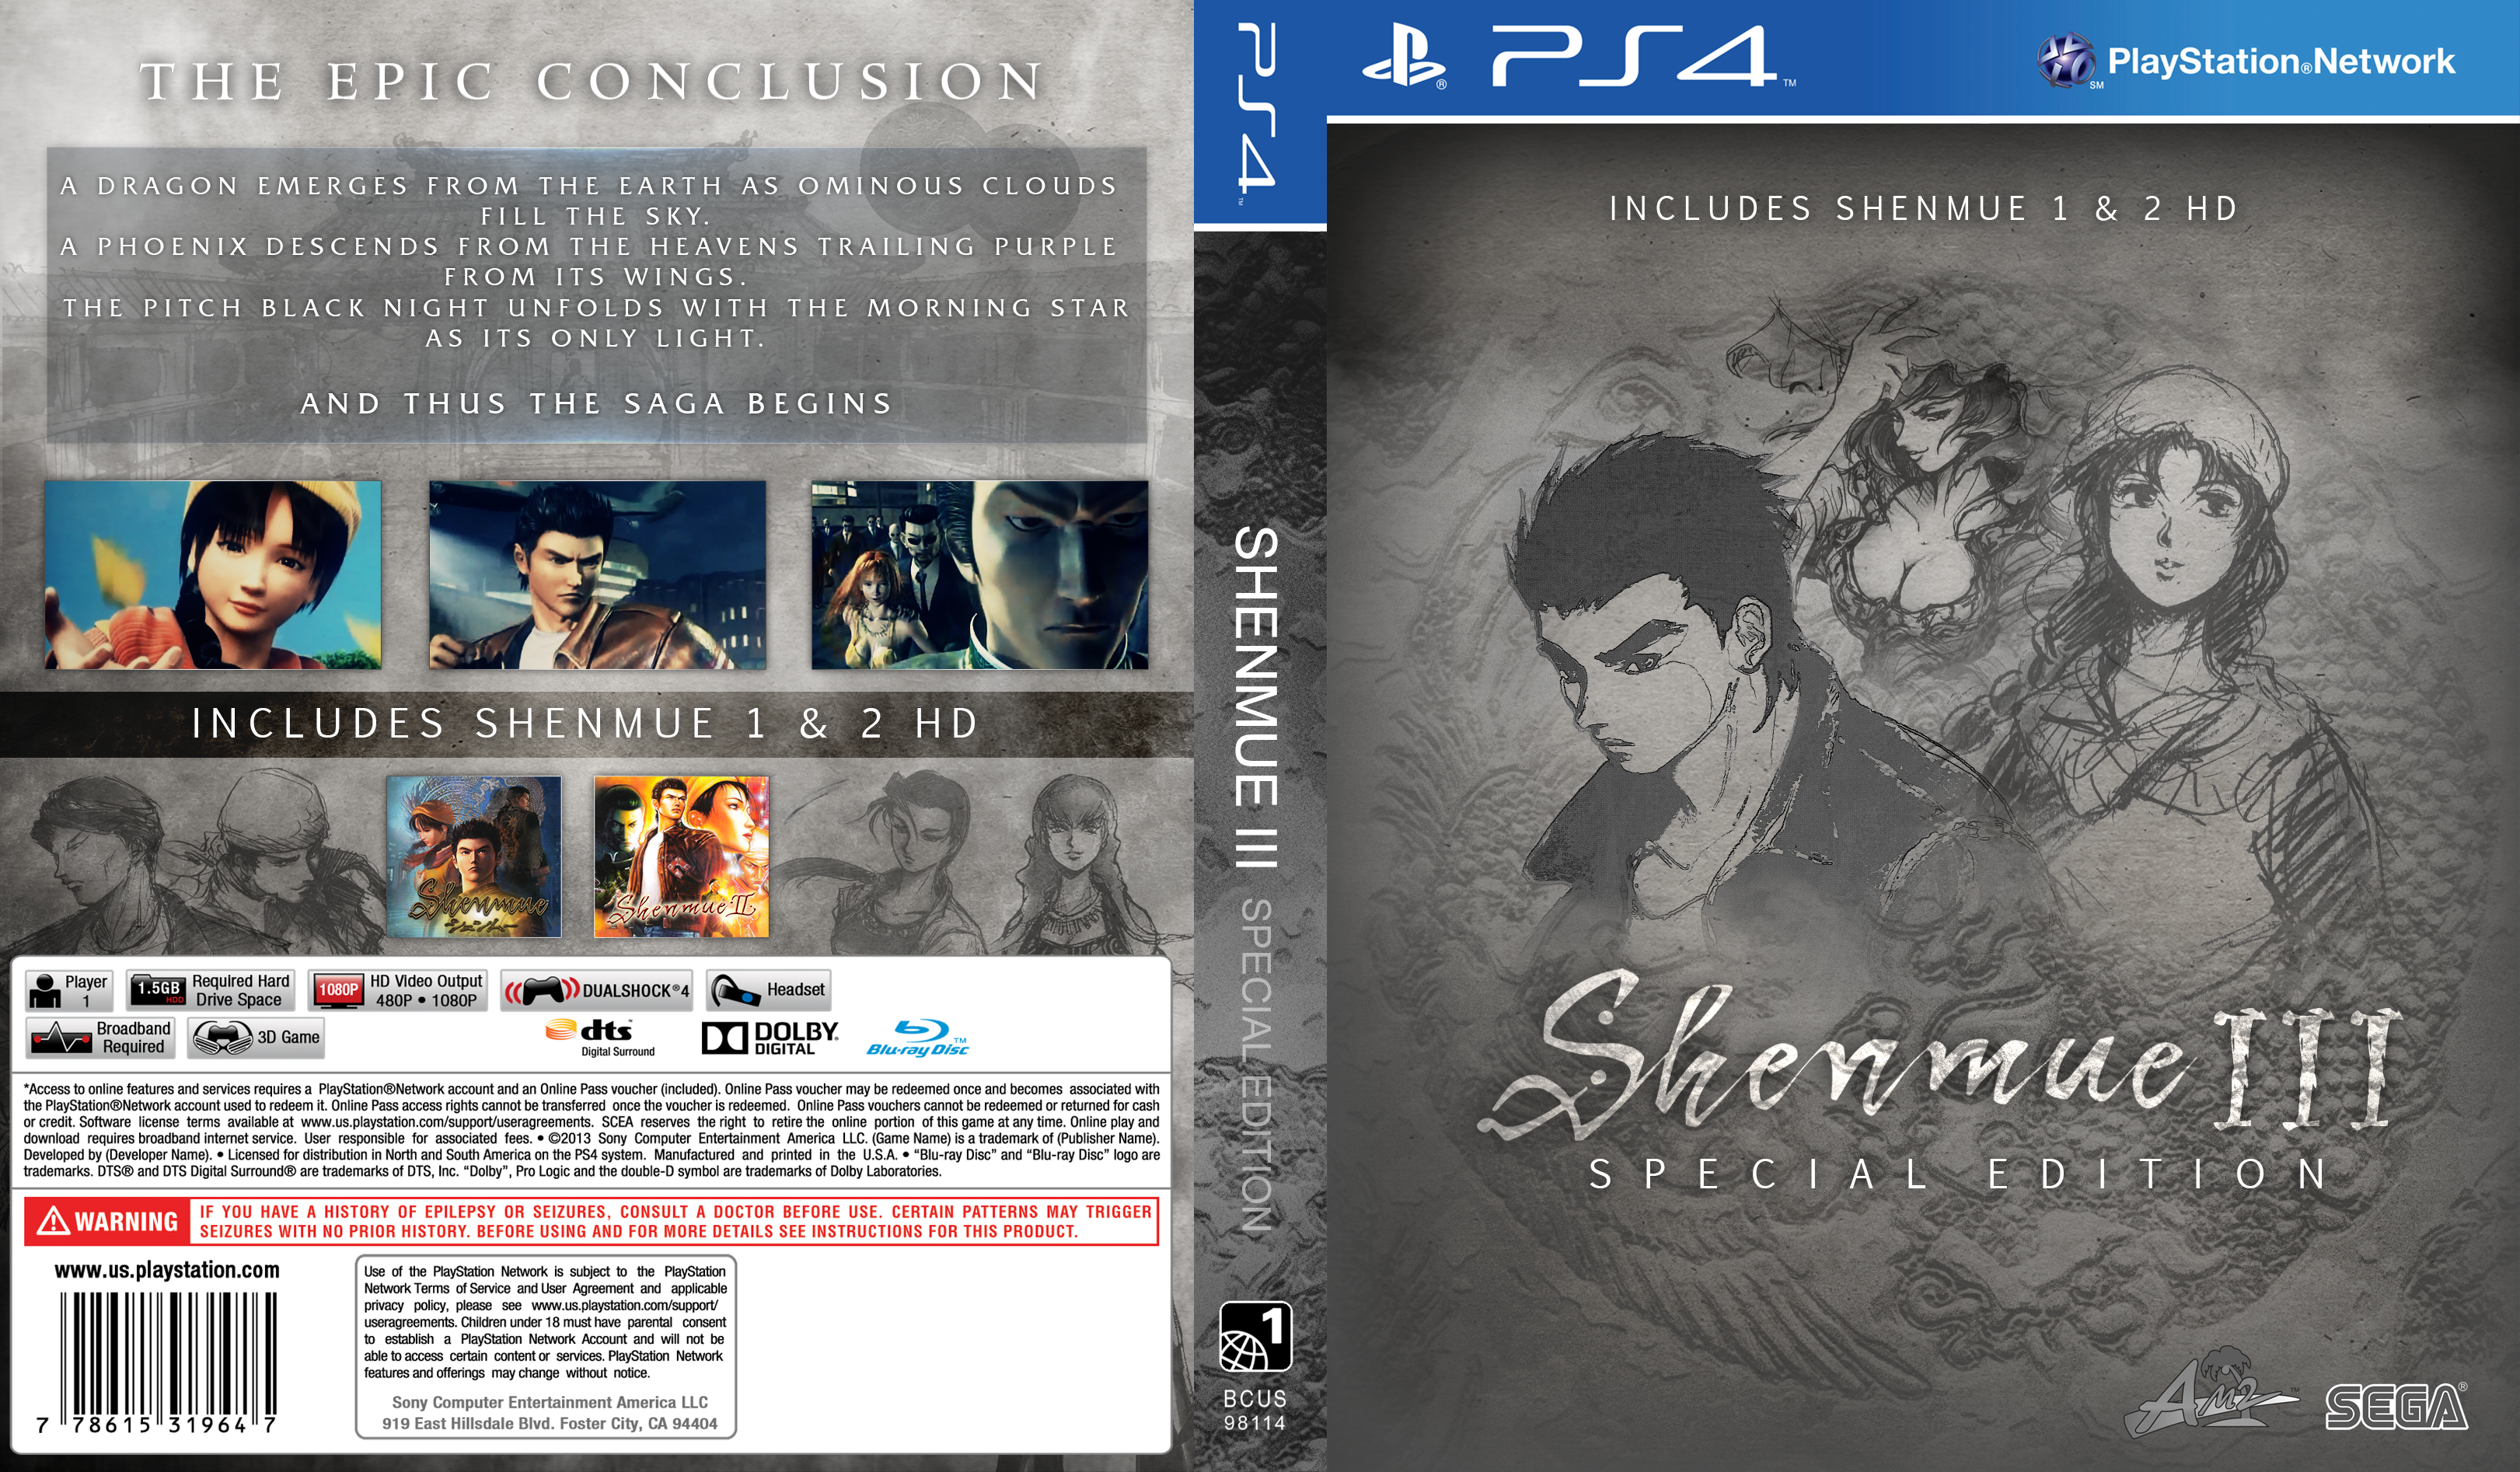 Shenmue III Special Edition box cover